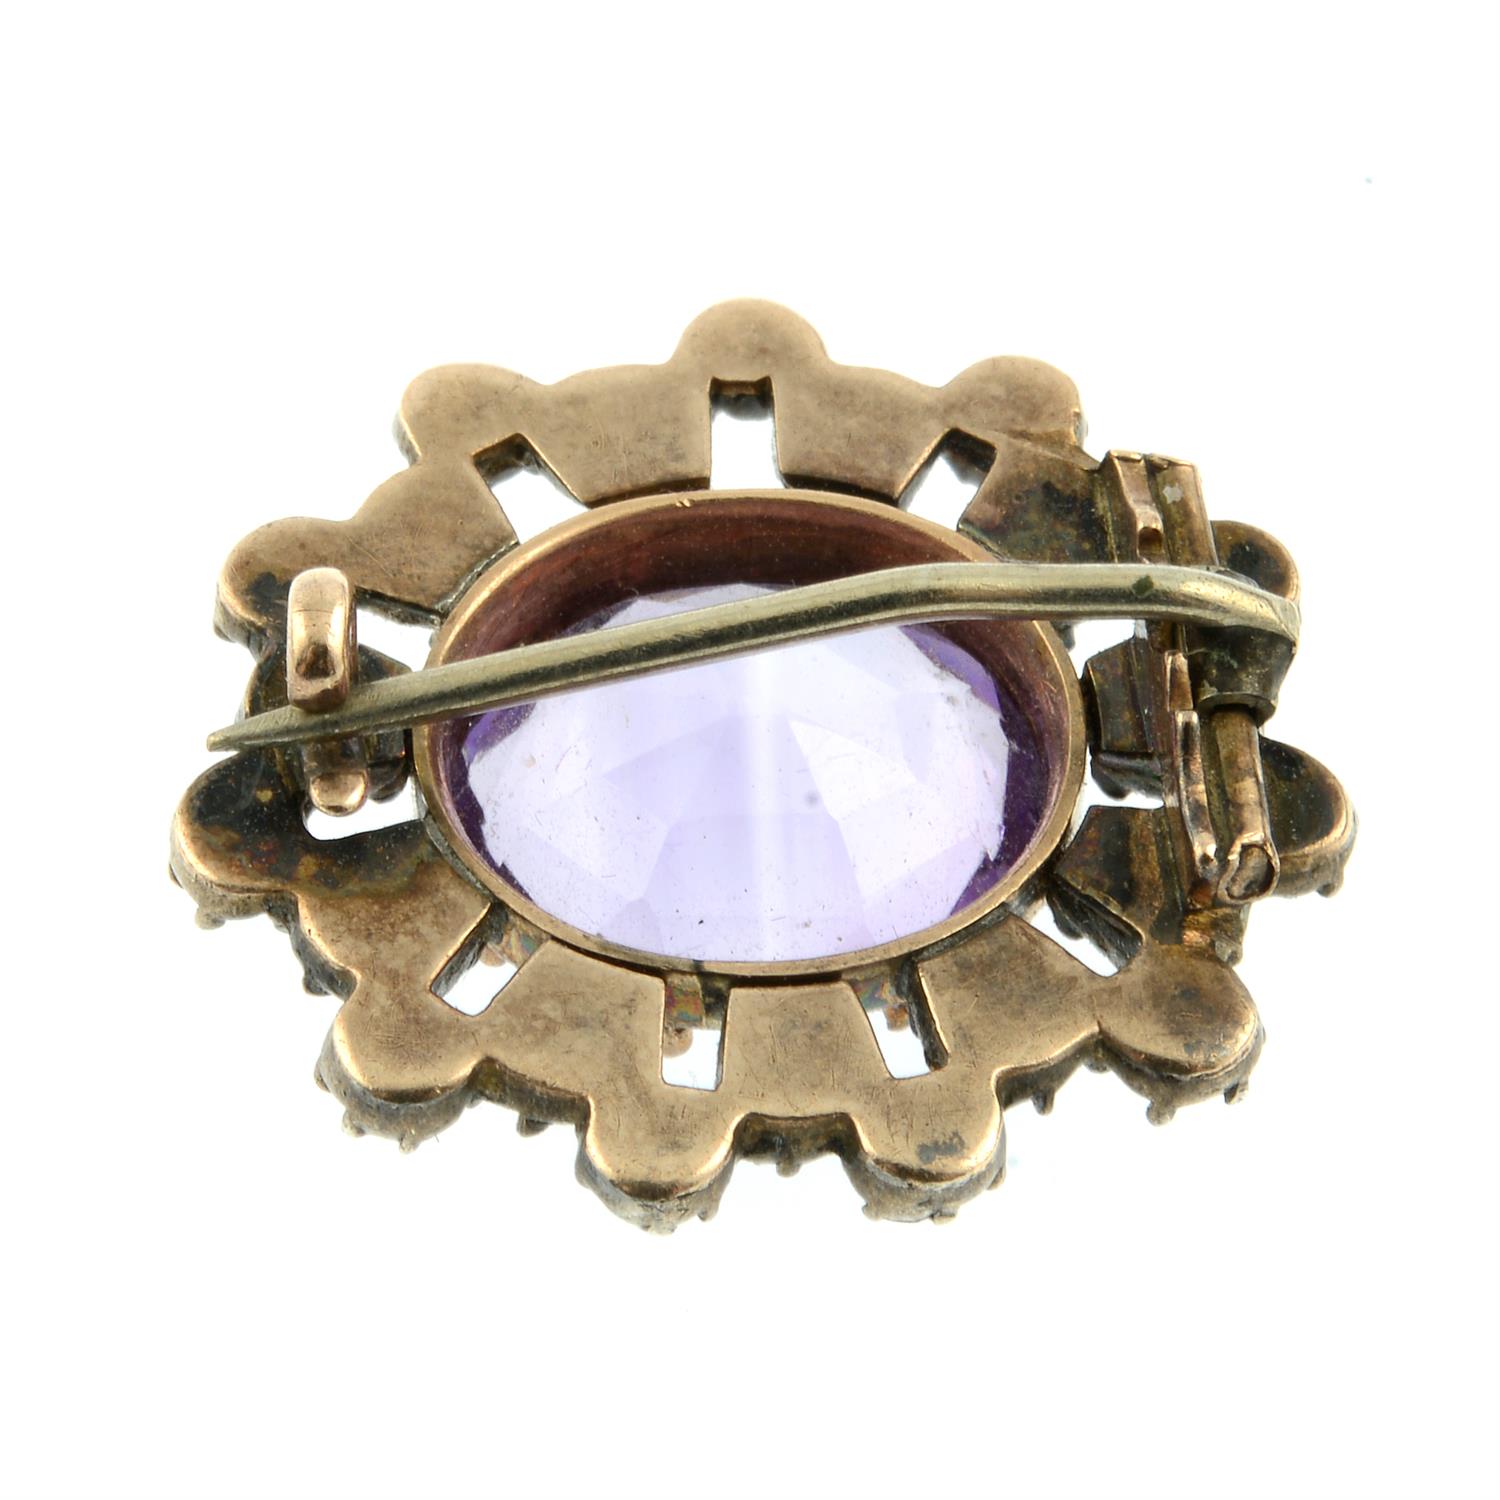 An early to mid 19th century silver and gold amethyst and rose-cut diamond brooch. - Image 3 of 4